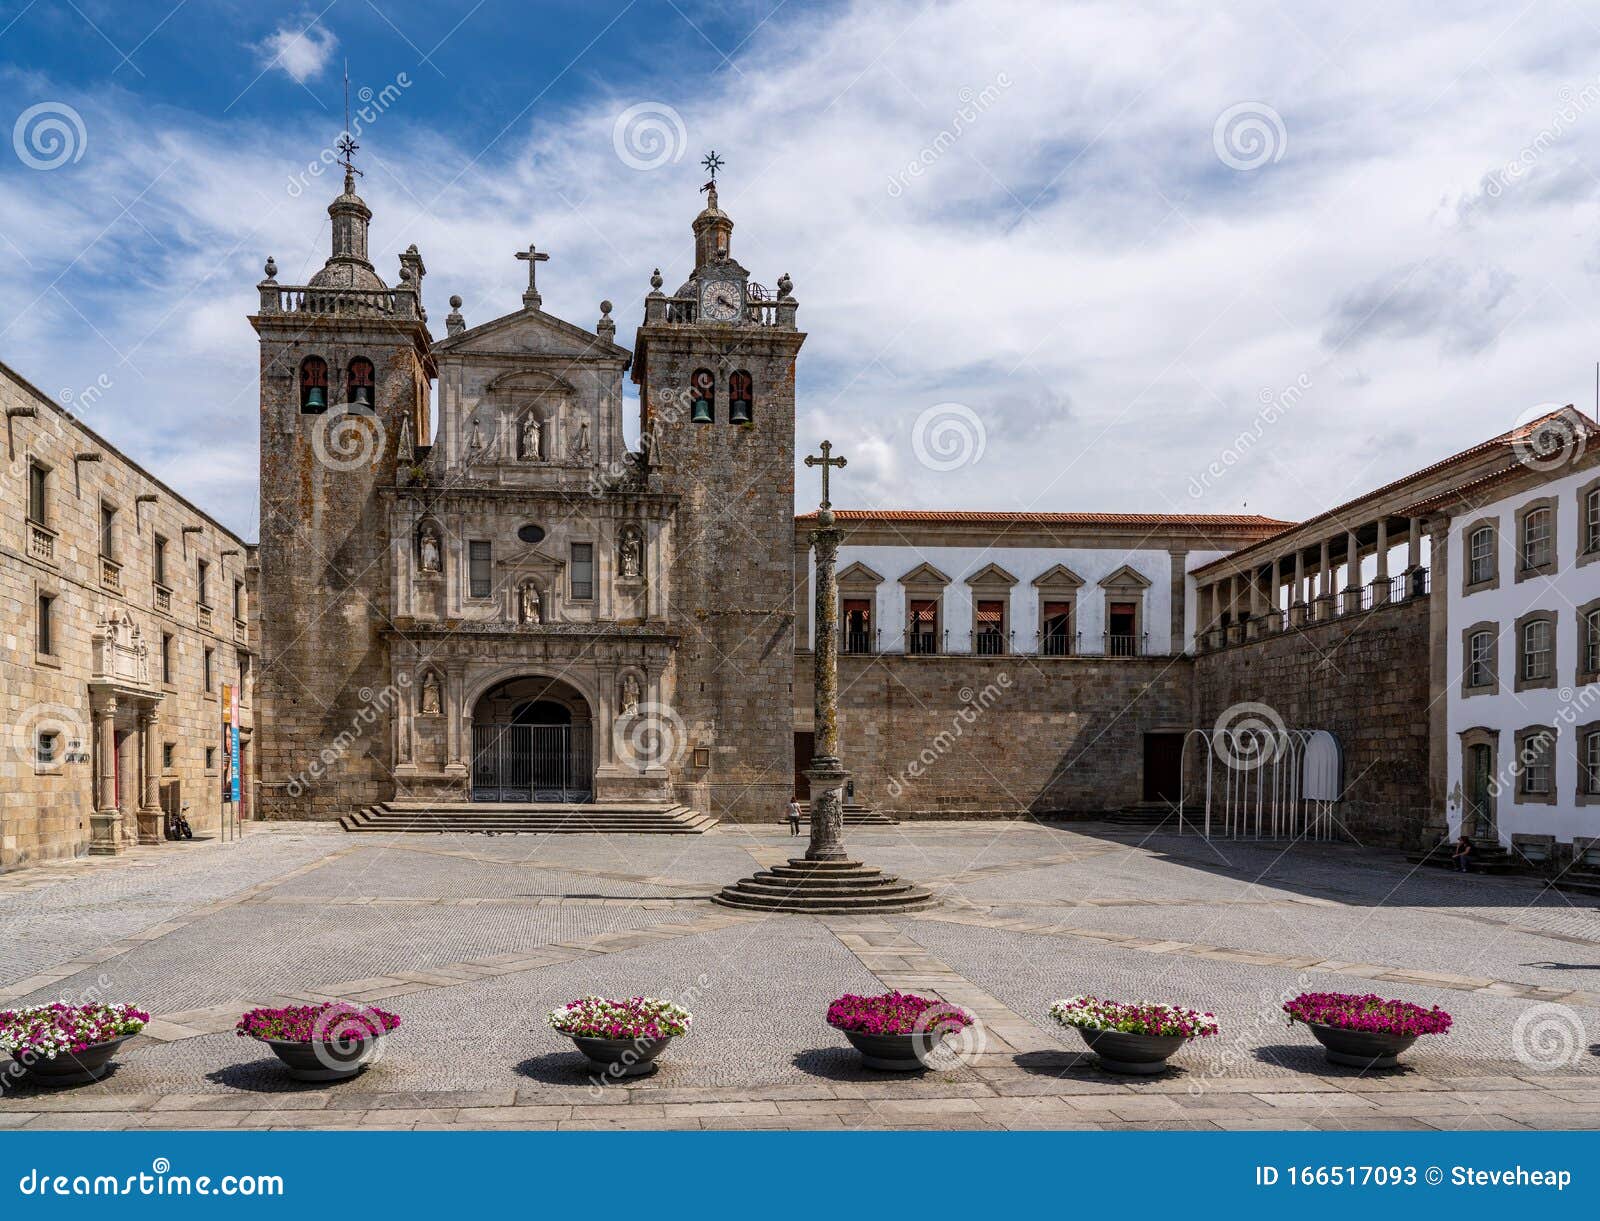 the main square of viseu by the cathedral in the old town